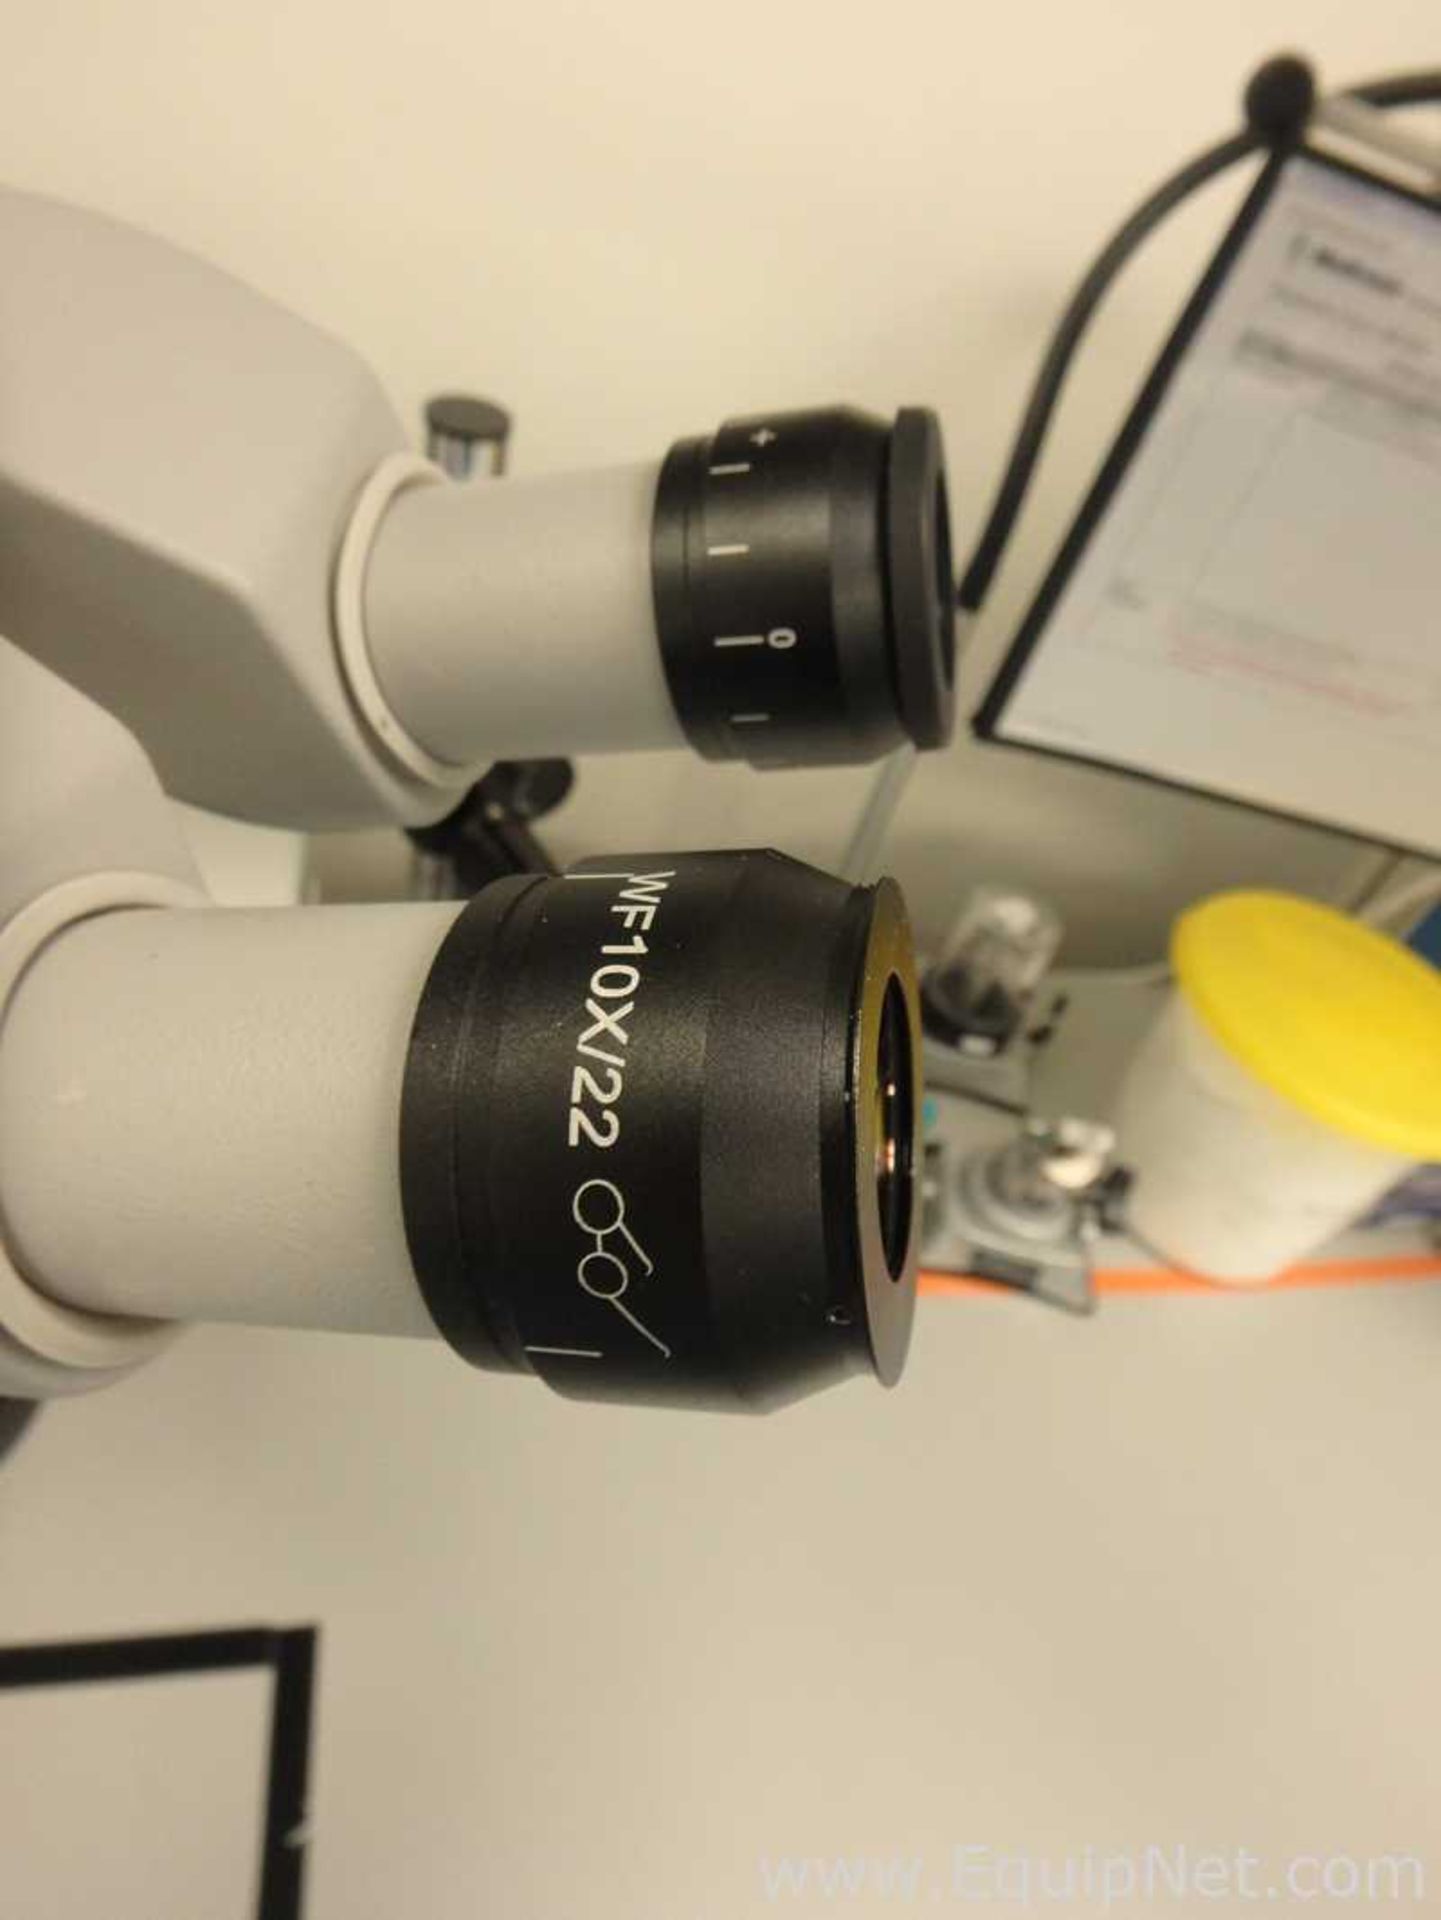 Boom Mounted Stereo Microscope - Image 8 of 12